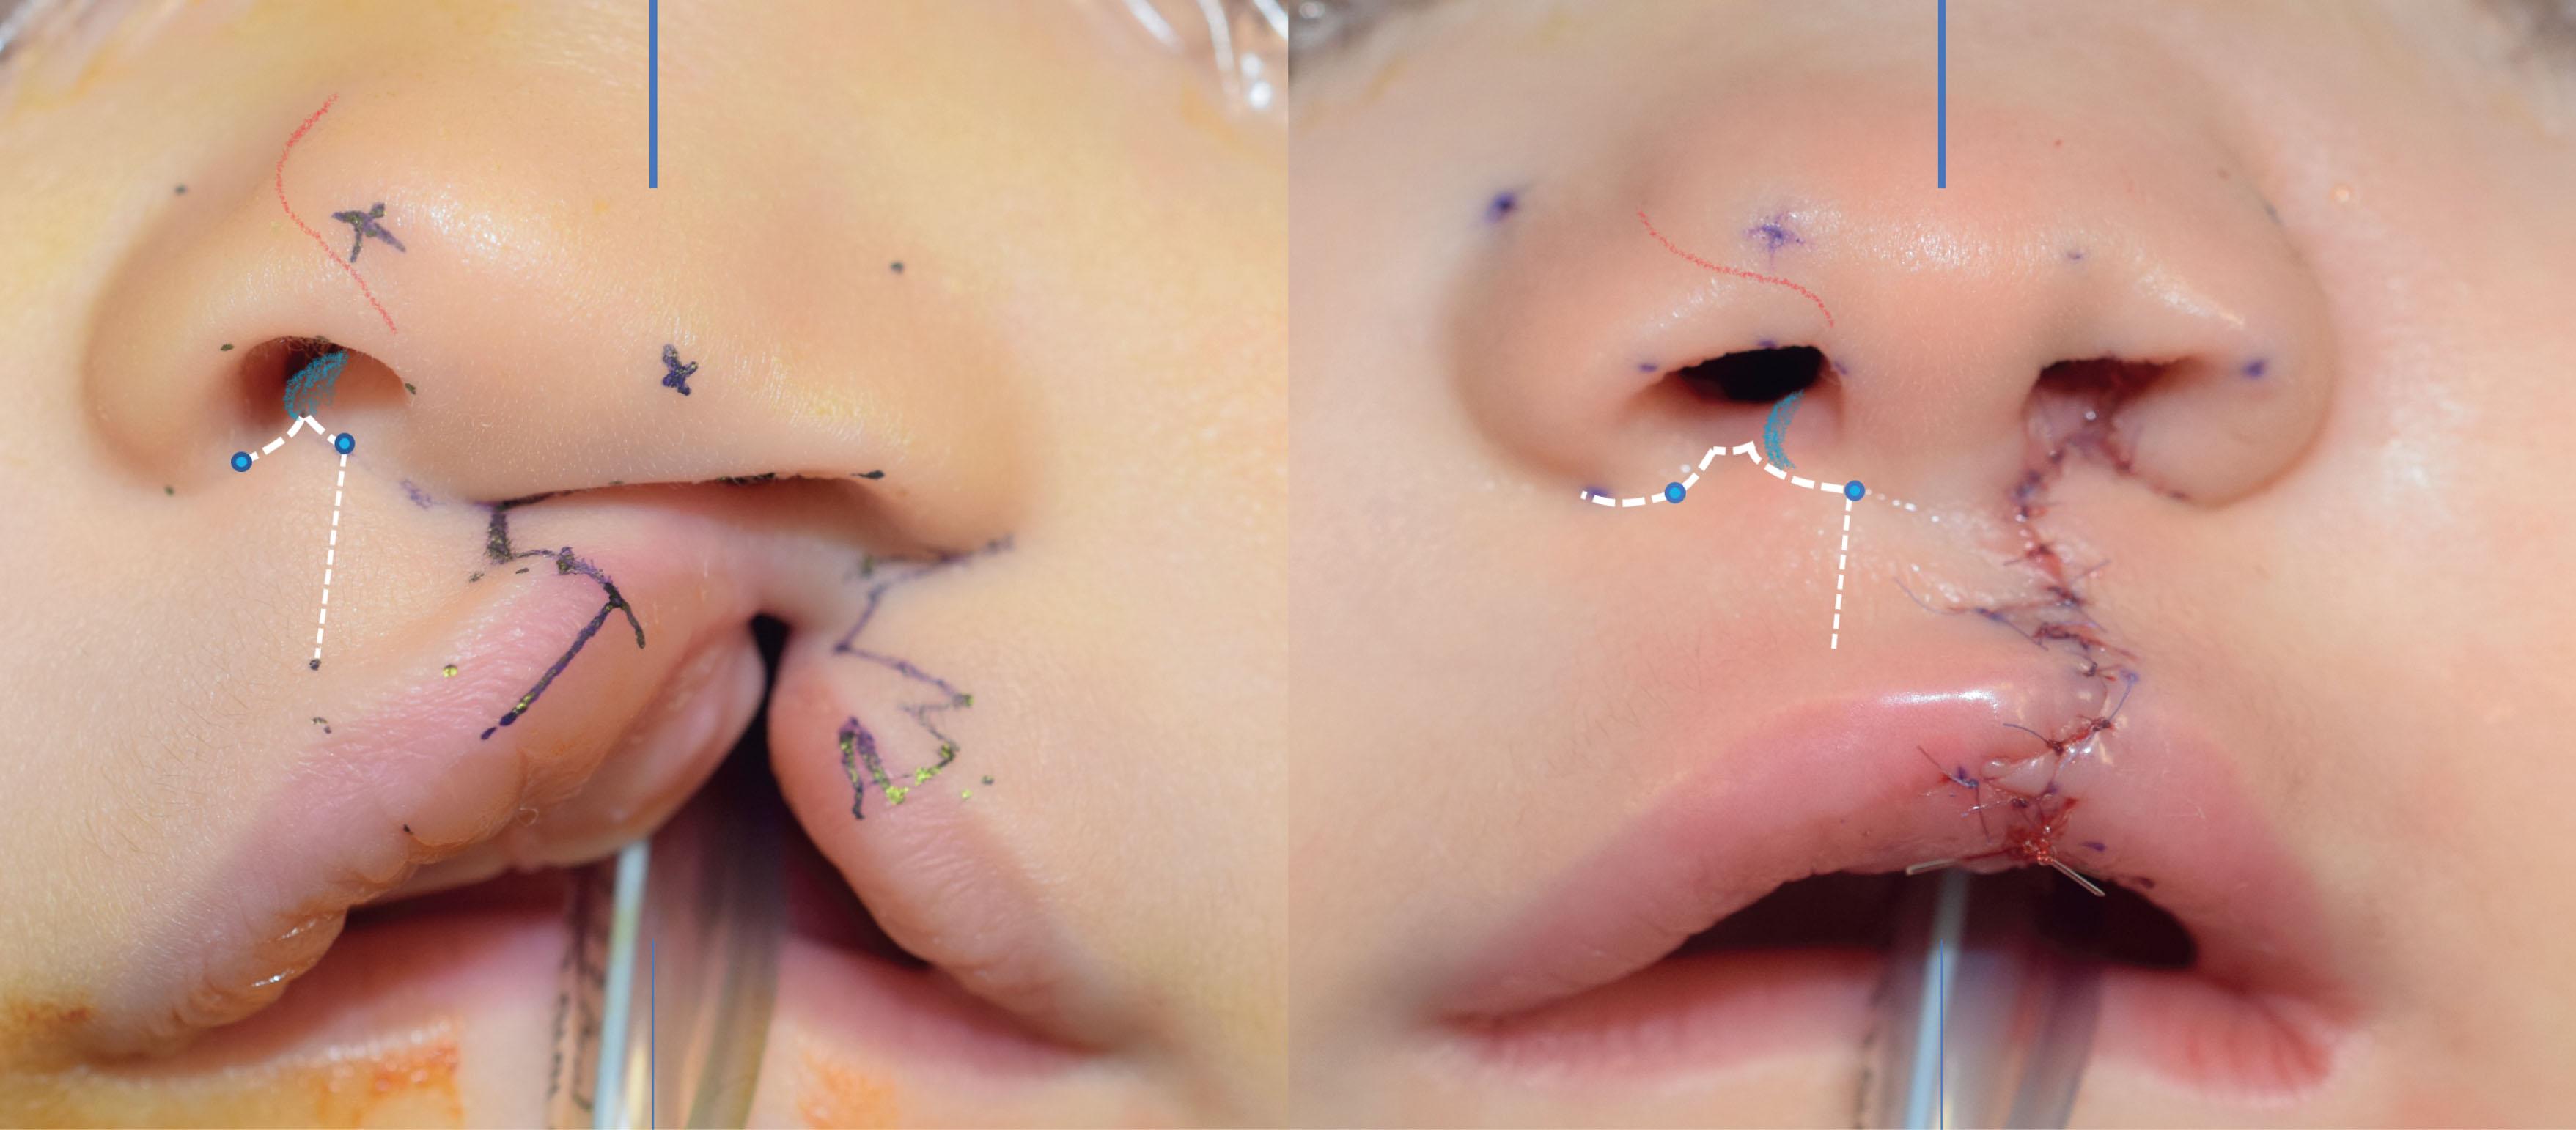 Figure 19.4.4, The non-cleft side is not normal and not static: Uncoupled premaxillary growth results in the non-cleft side being squished. Constriction of the nostril pinches the lateral crura alar ring and makes the hemi-tip prominent and “boxy”. The opposing cleft-side and non-cleft-side alterations are reversed with appropriate repair. The non-cleft-side nasal sill (thick white line) widens, philtral column (thin white line) shortens, medial footplate (blue shading) flattens, and hemi-nasal tip (red mark) softens.